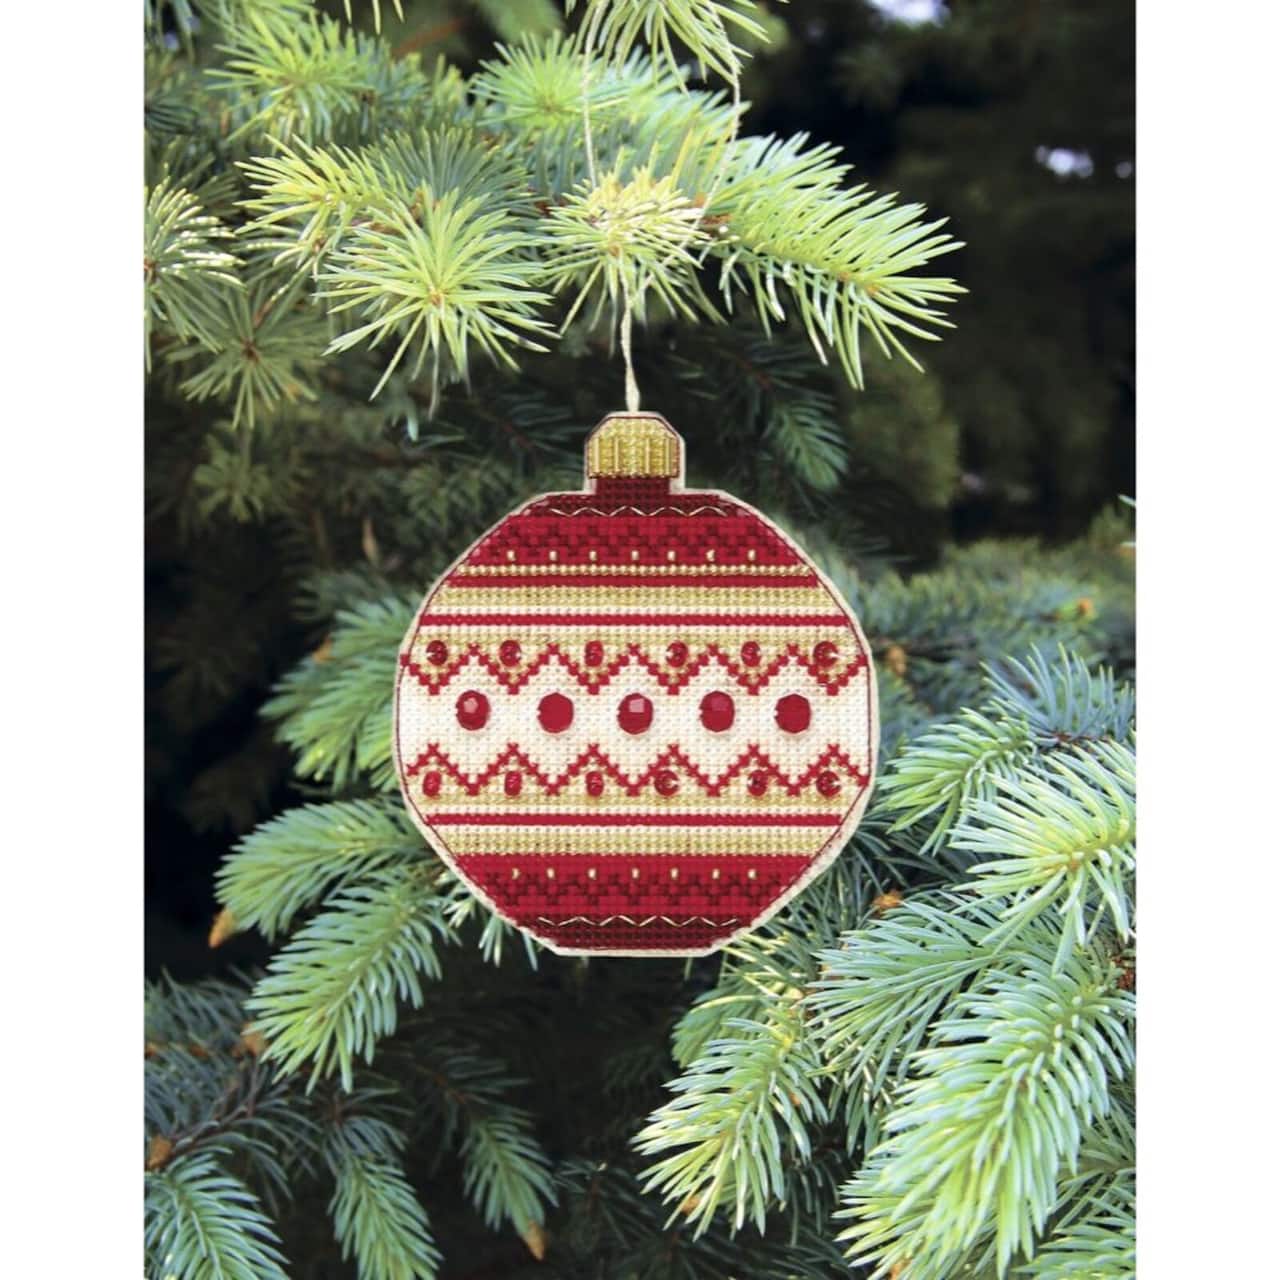 Crystal Art Christmas Tree Toy Plastic Canvas Counted Cross Stitch Kit Set Of Pictures Merry Christmas